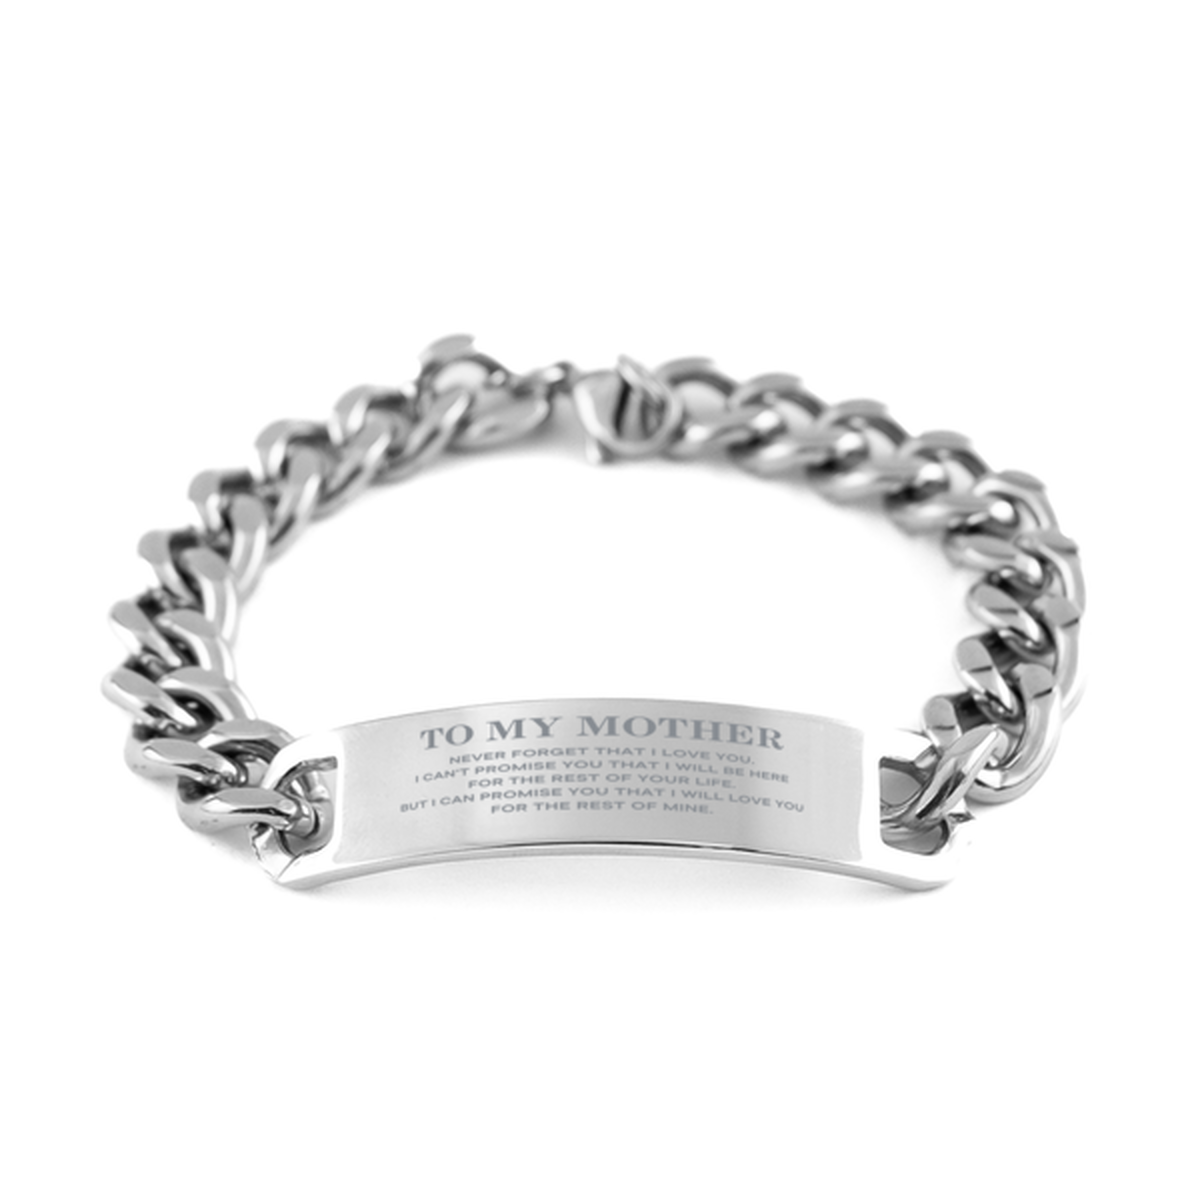 To My Mother Gifts, I will love you for the rest of mine, Love Mother Bracelet, Birthday Christmas Unique Cuban Chain Stainless Steel Bracelet For Mother